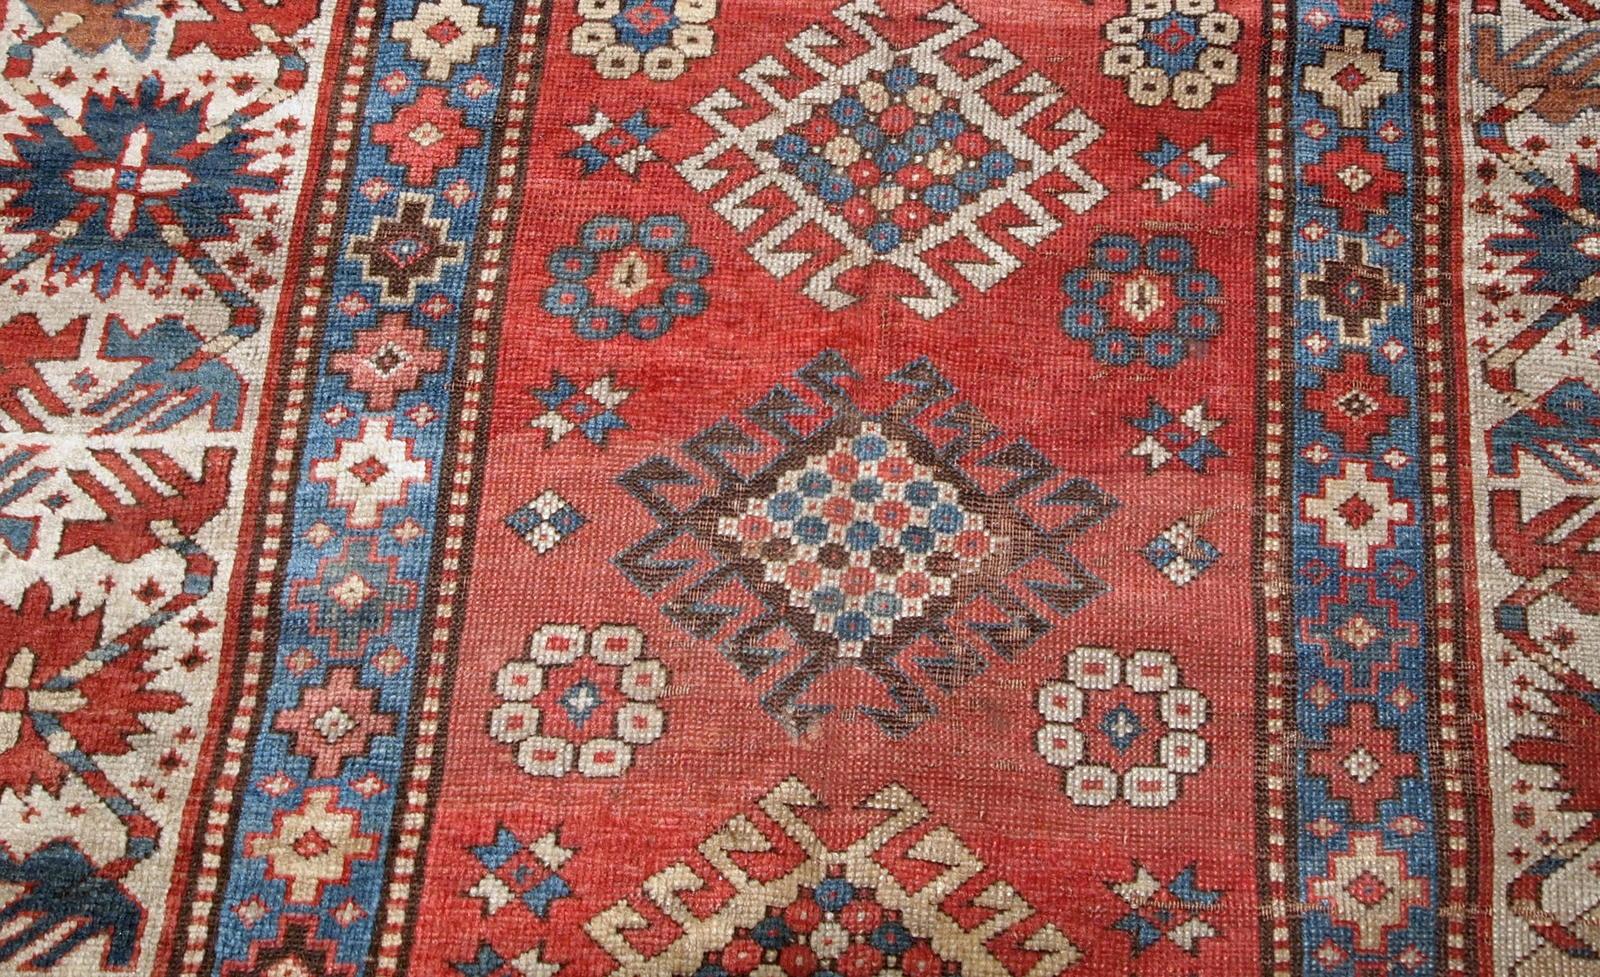 Handmade antique Caucasian Kazak rug in red and beige shades. The rug is from the end of 19th century in original condition, it has some low pile, a little cut on one side.

-condition: original, low pile, a little cut on one side,

-circa: